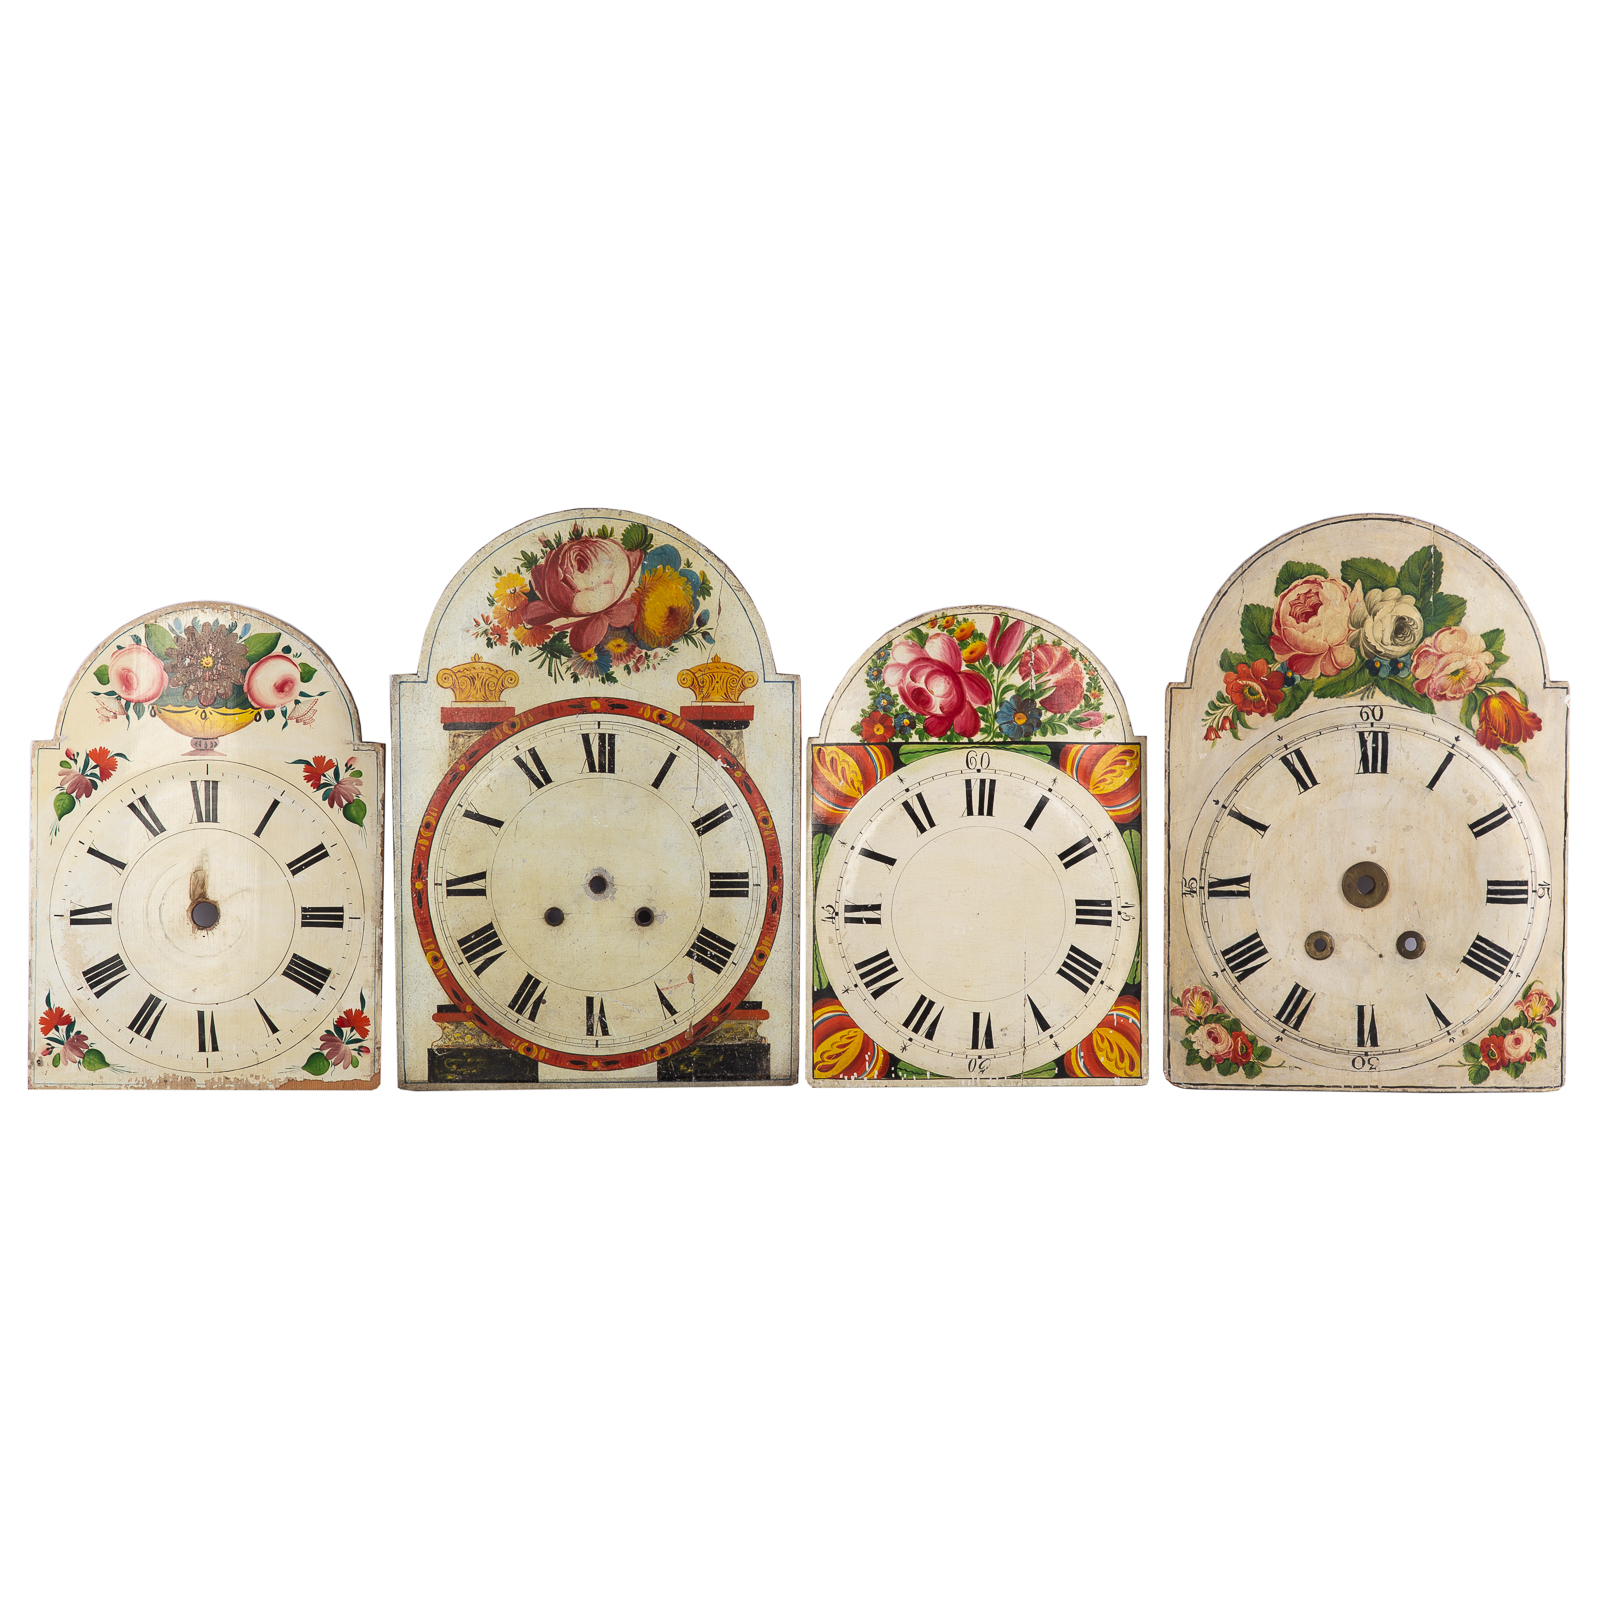 FOUR PAINTED WOOD CLOCK FACES 19th 28788d